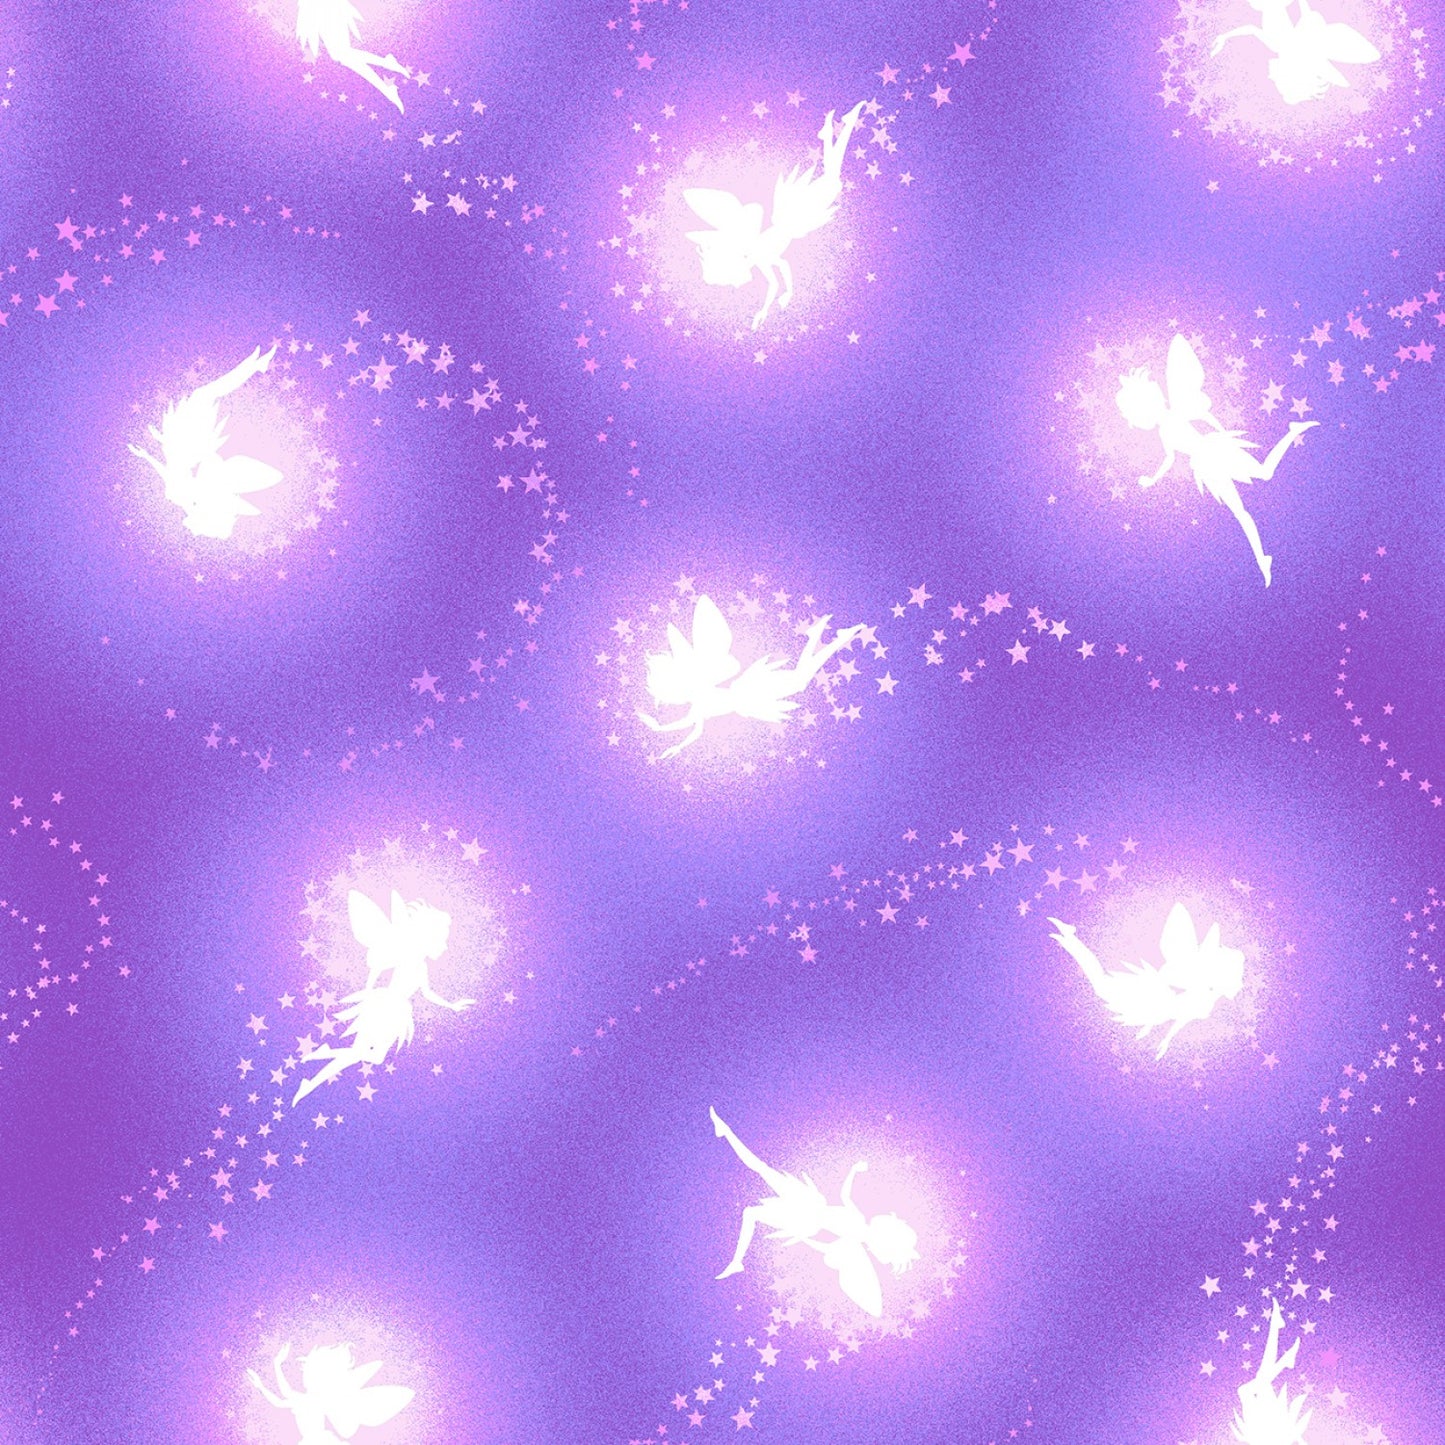 Pixies & Petals Glows in the Dark by Salt Meadows Studio Pixie Silhouettes Purple    195G-55 Cotton Woven Fabric